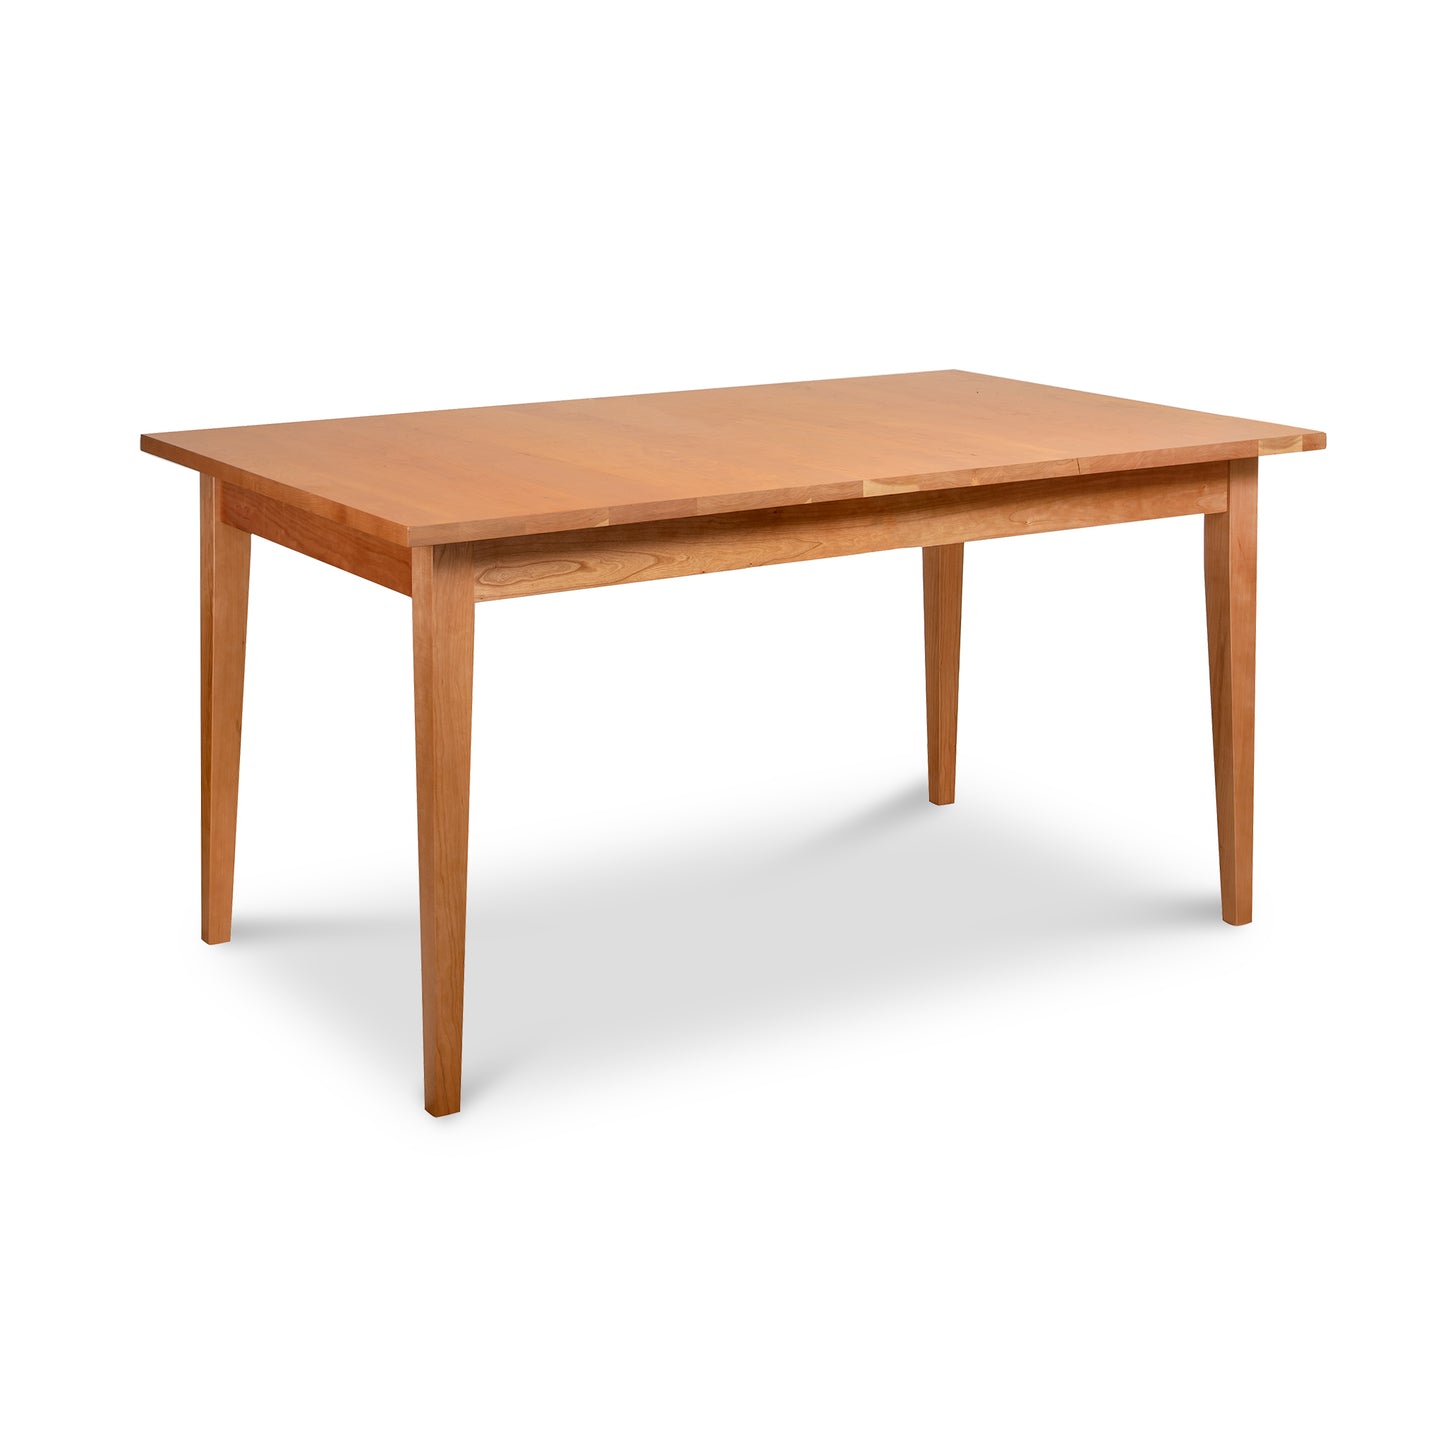 A Lyndon Furniture Classic Shaker Solid Top dining table with two legs on a white background.